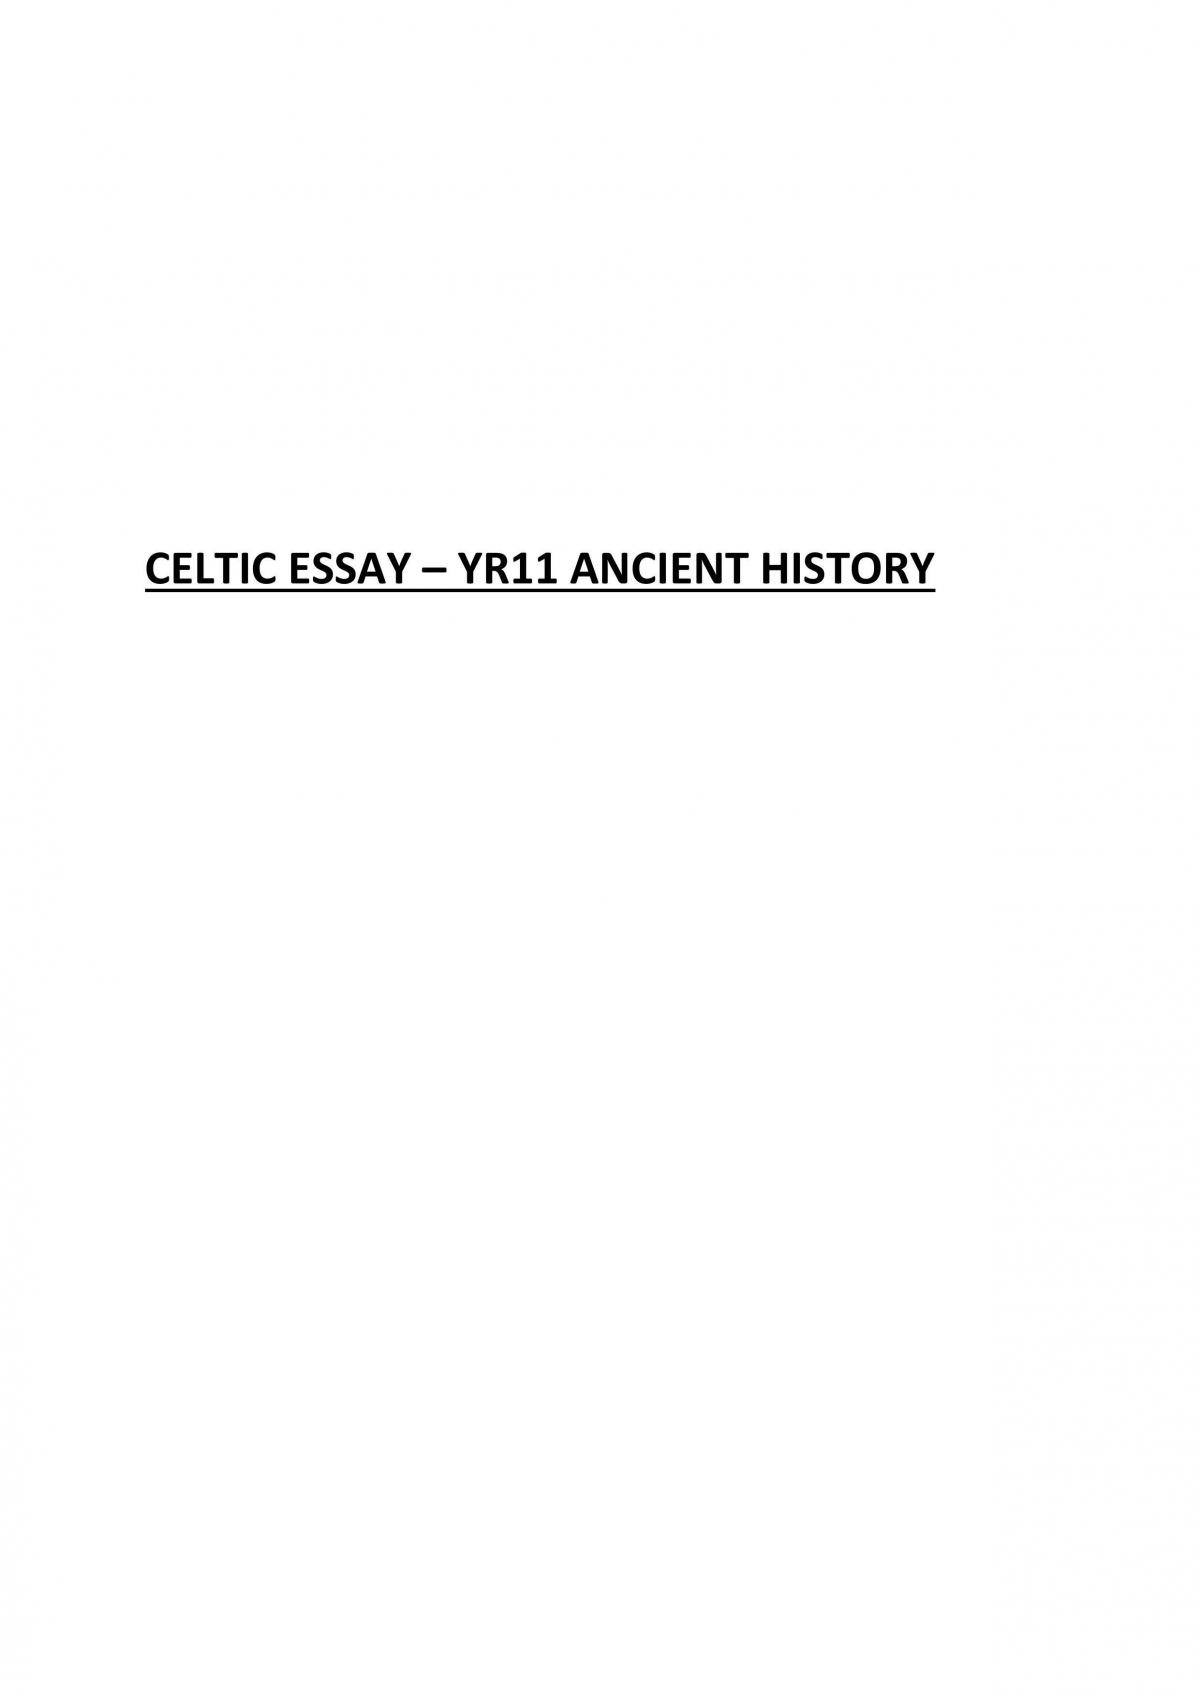 Ancient History Essay - Celts - Page 1